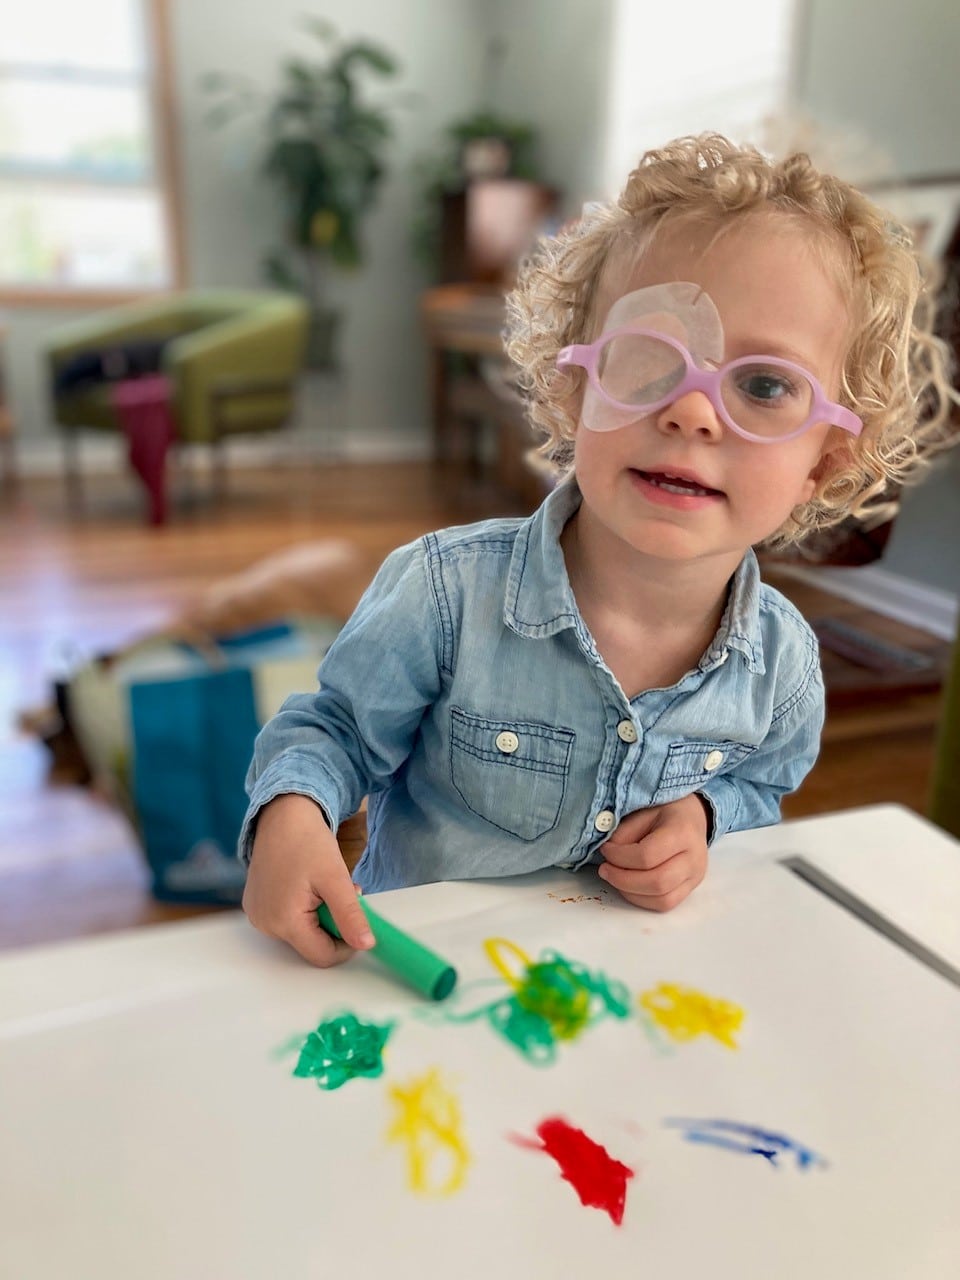 A young child with glasses and a patch over one eye plays with toys at a table